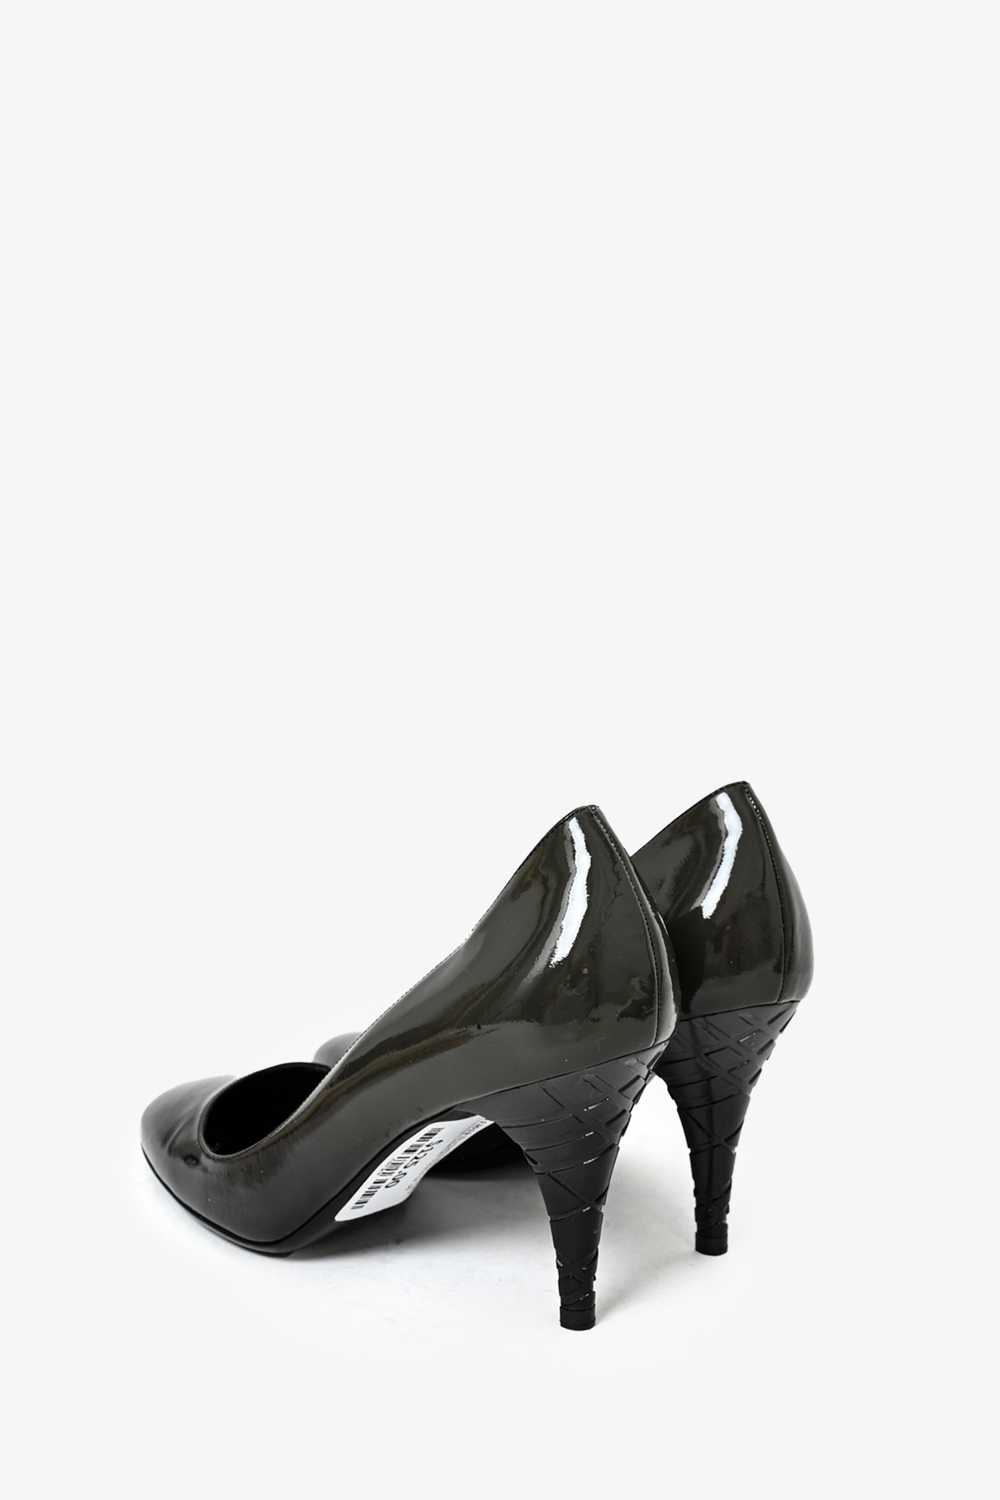 Burberry Black/Grey Patent Leather Heels Size 38 - image 3